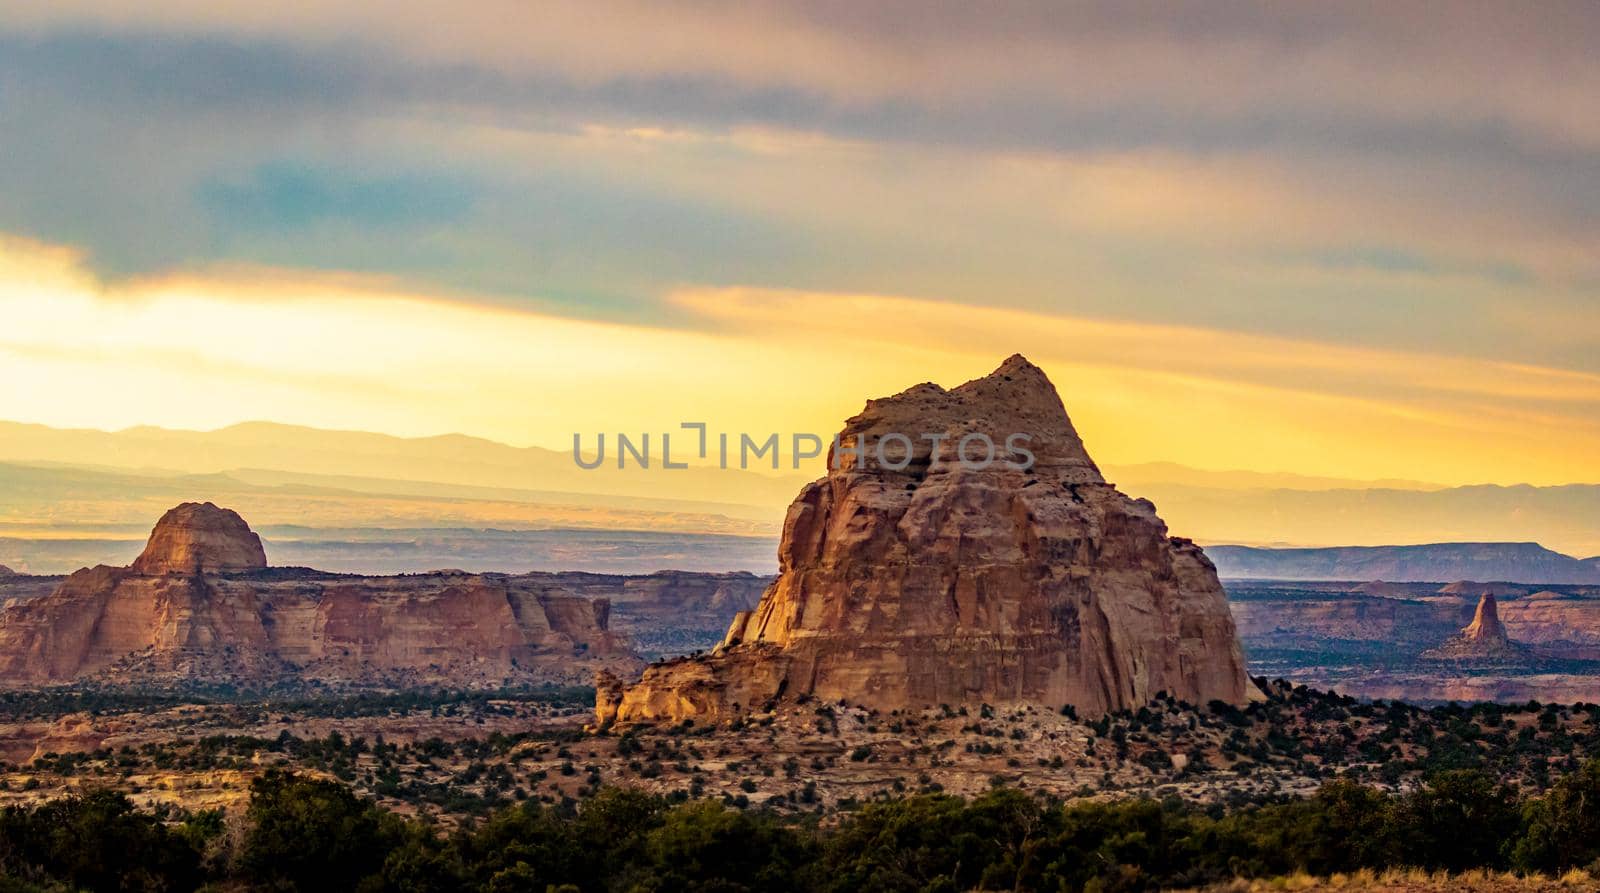 Chimney Rock in Utah, seen from the Ghost Rock rest Area off Interstate 70